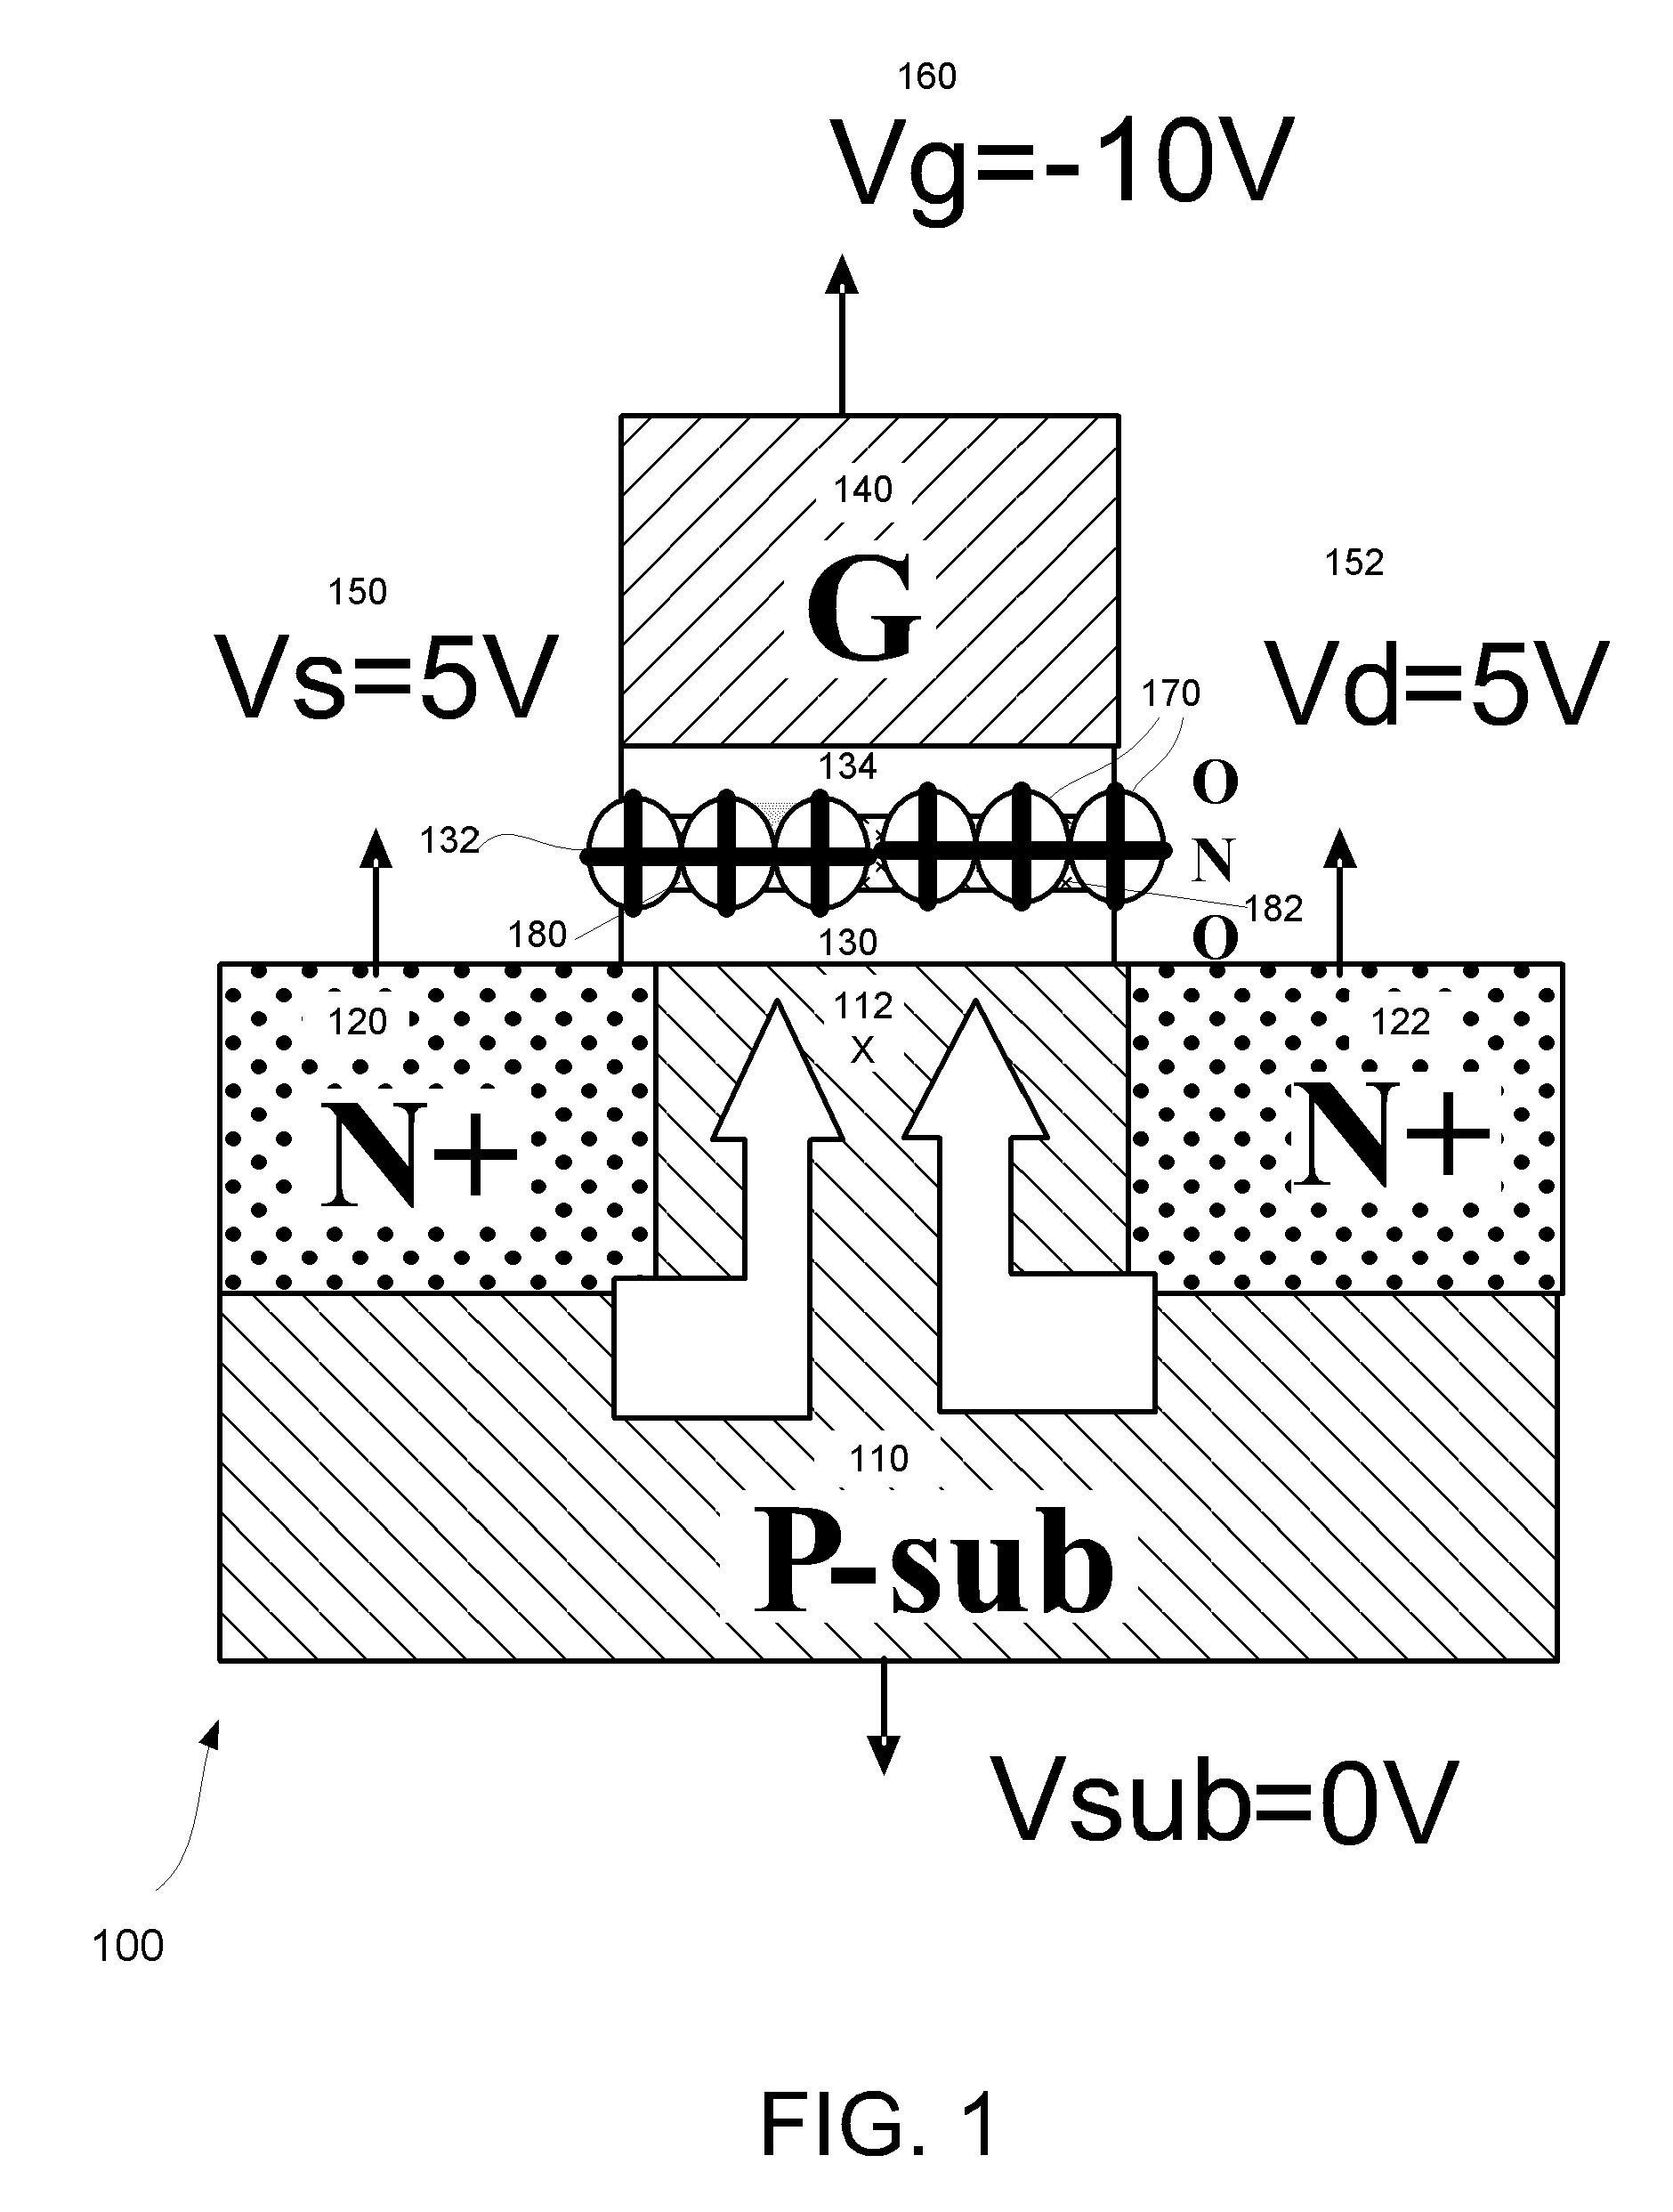 Double-side-bias methods of programming and erasing a virtual ground array memory